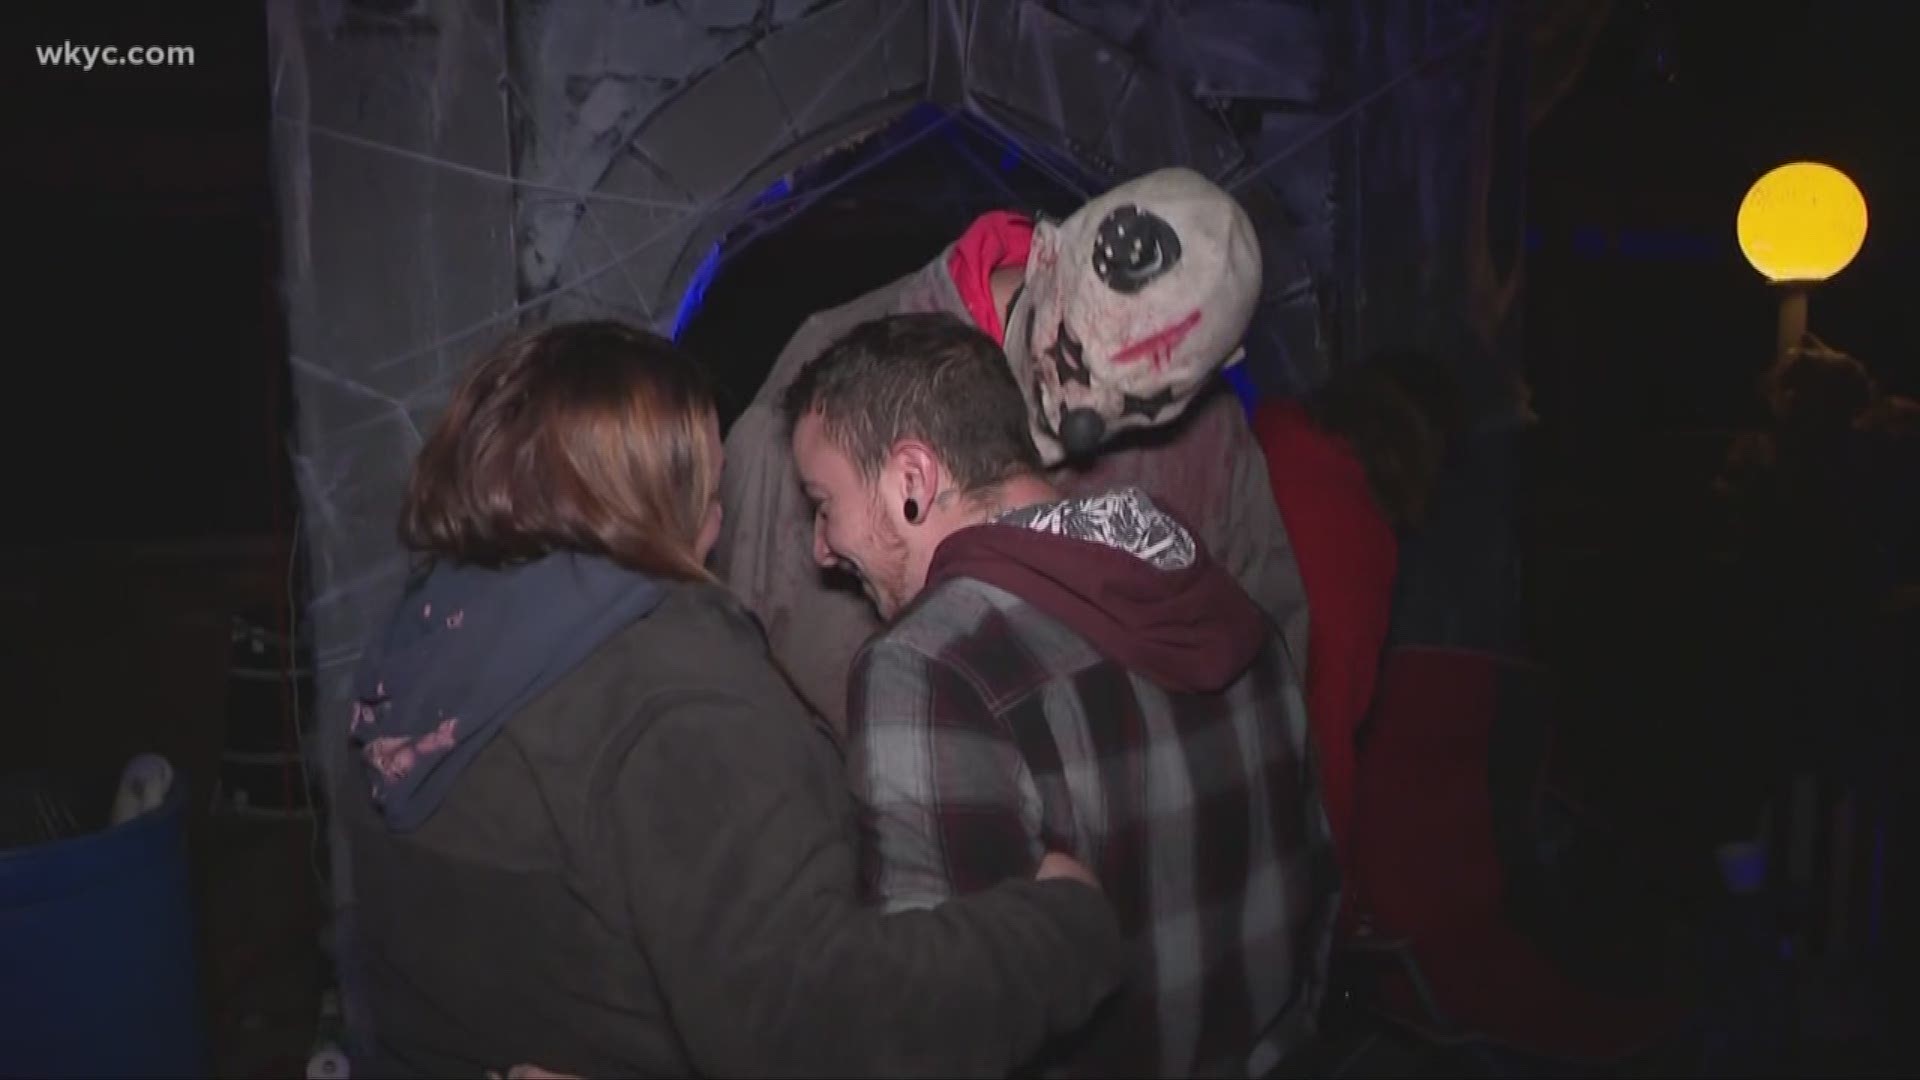 'Mock rape' allegations spark police investigation, firings at Akron Fright Fest haunted house